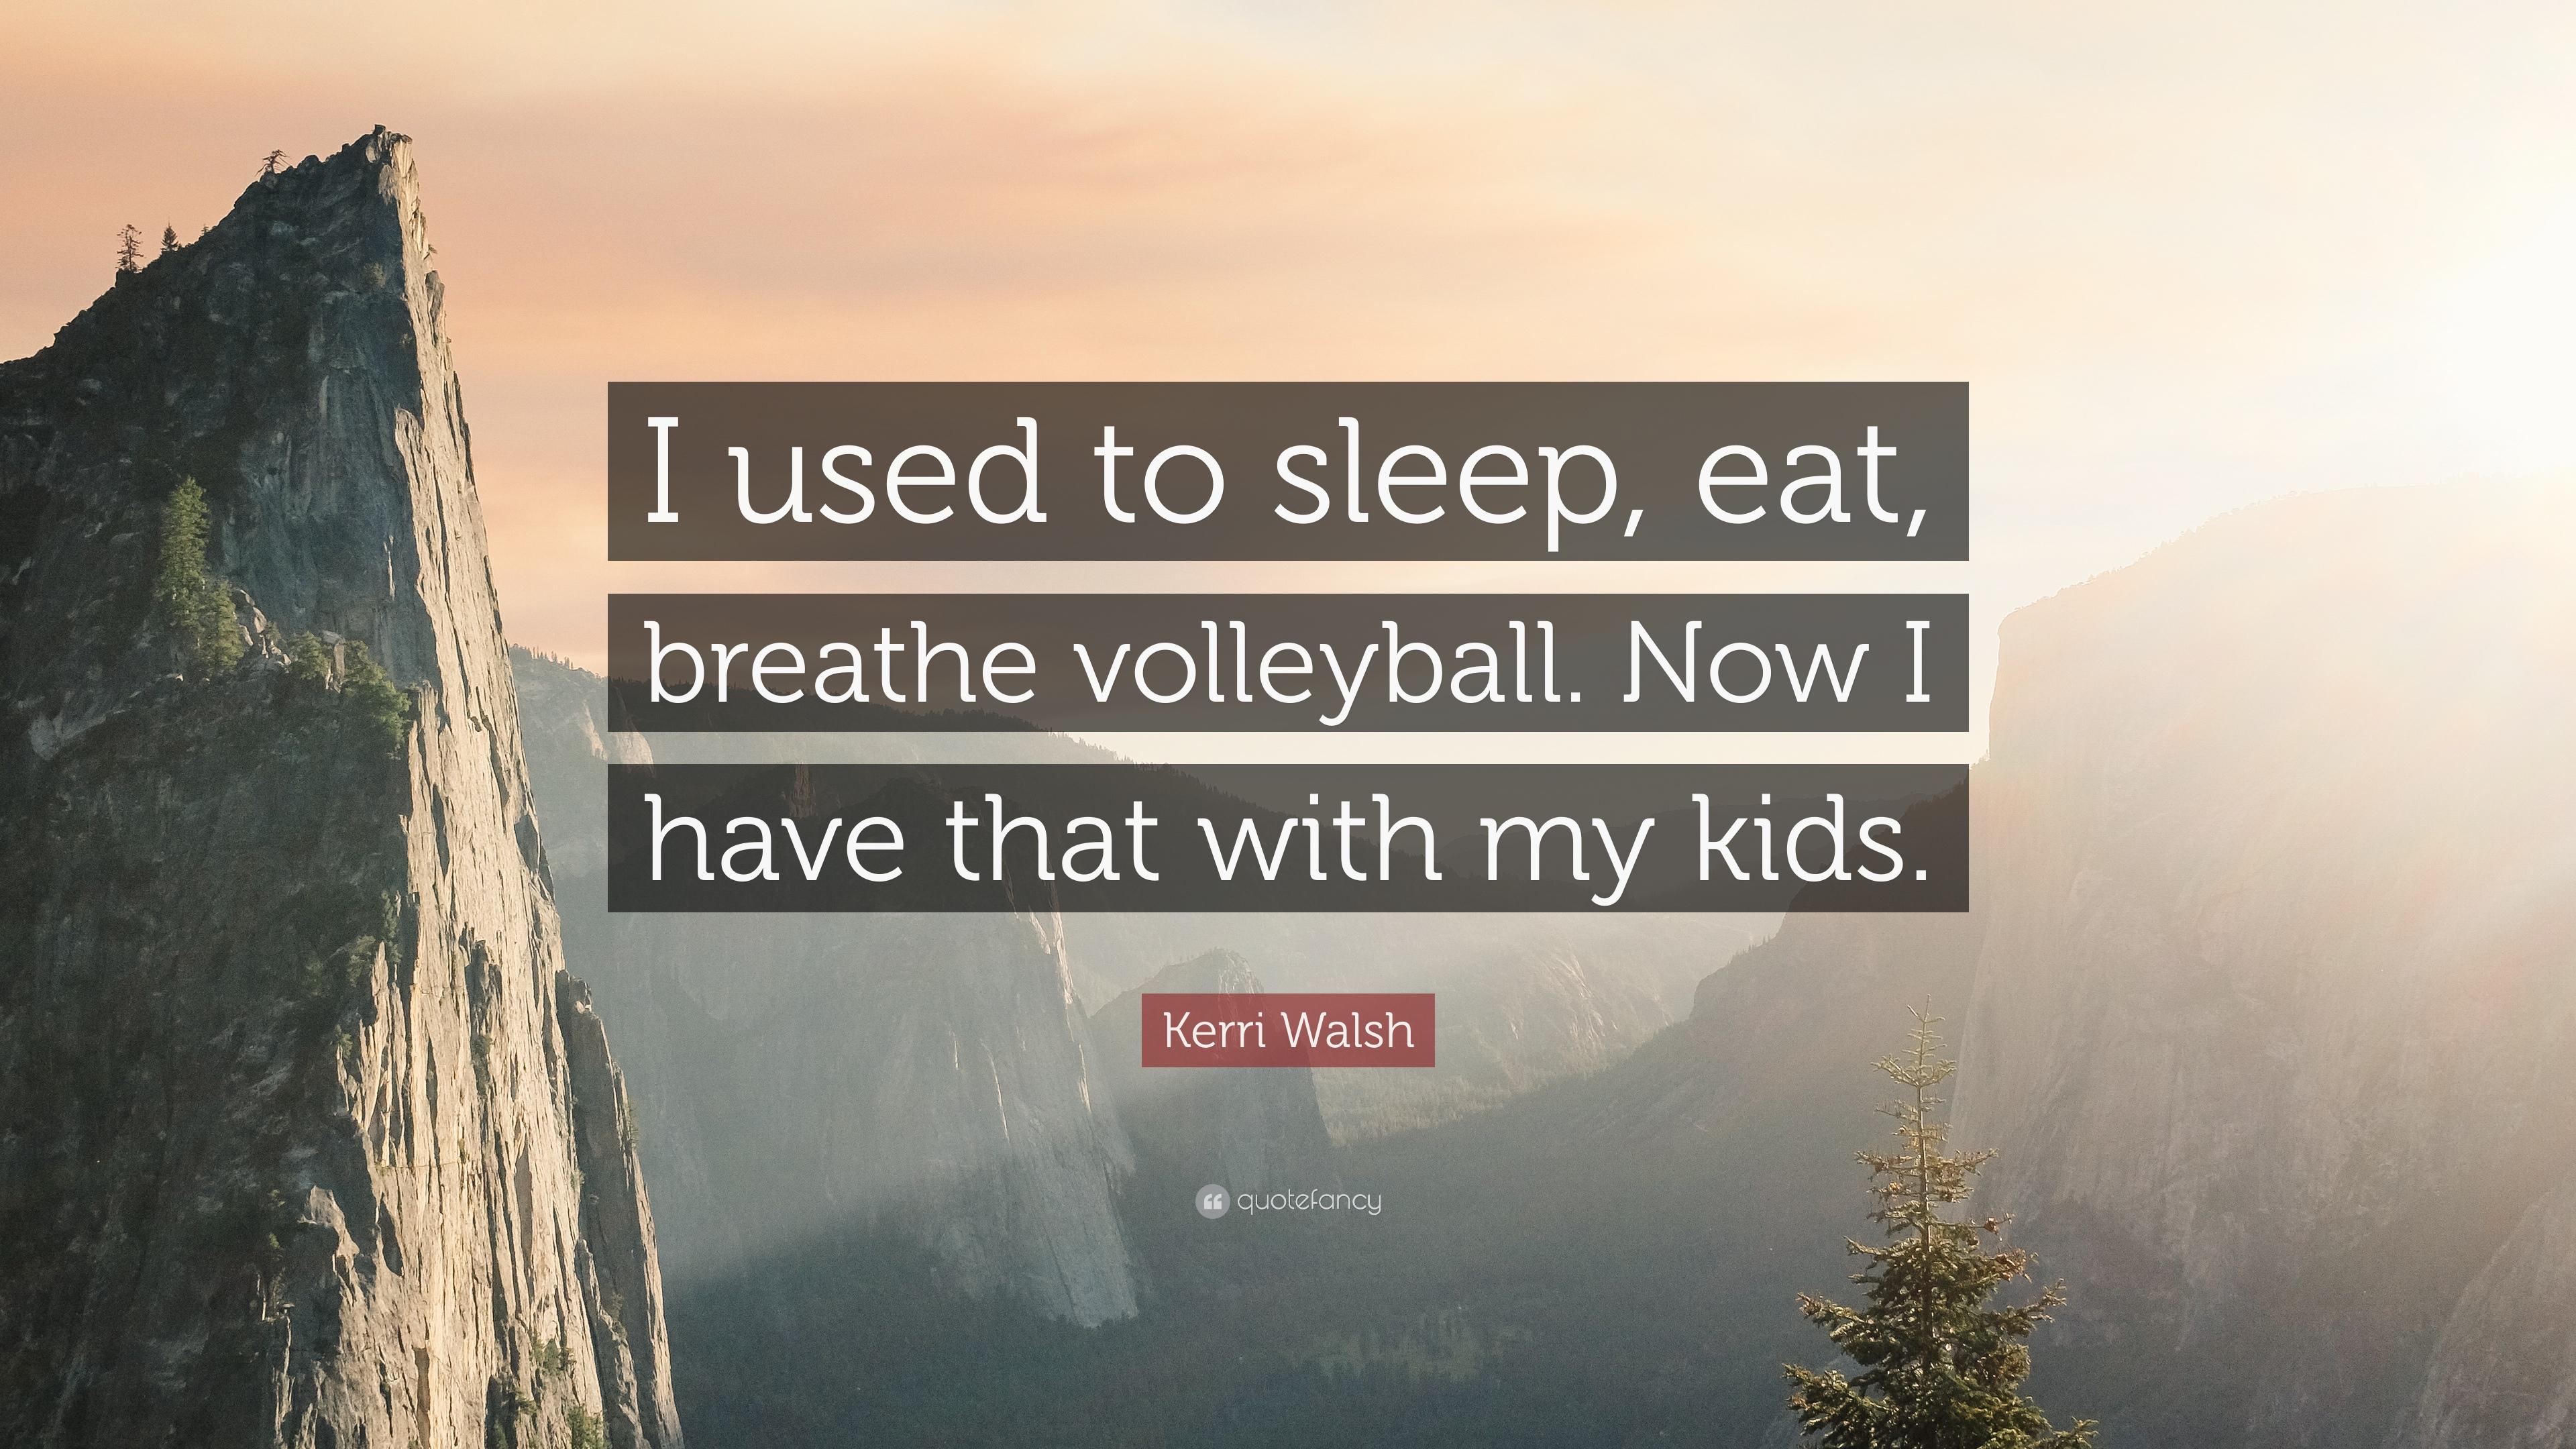 Kerri Walsh Quote: “I used to sleep, eat, breathe volleyball. Now I